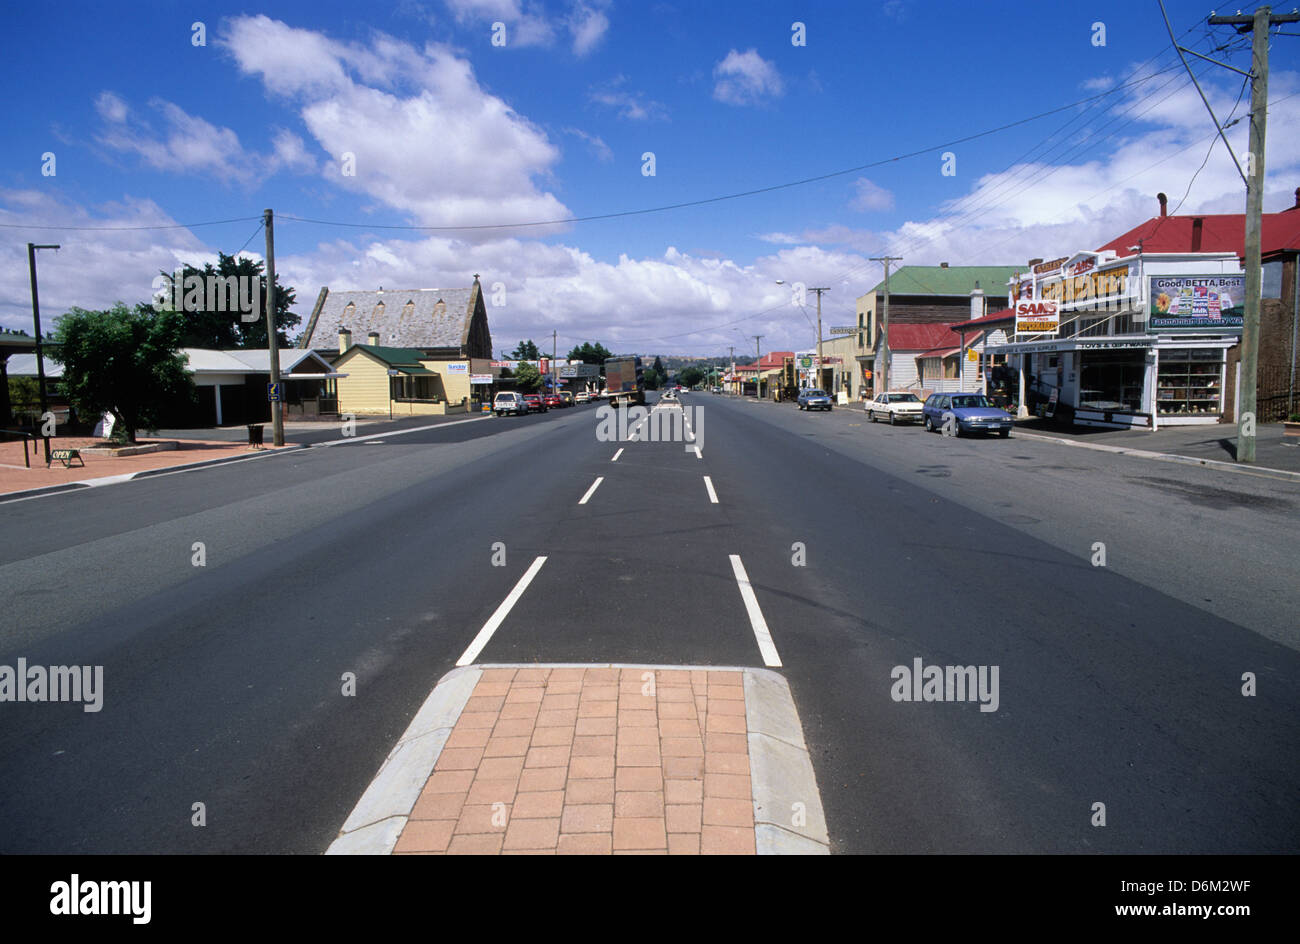 Australia, Tasmania, Campbell town, the main street, as most people would see it passing from Launceston to Hobart. Stock Photo